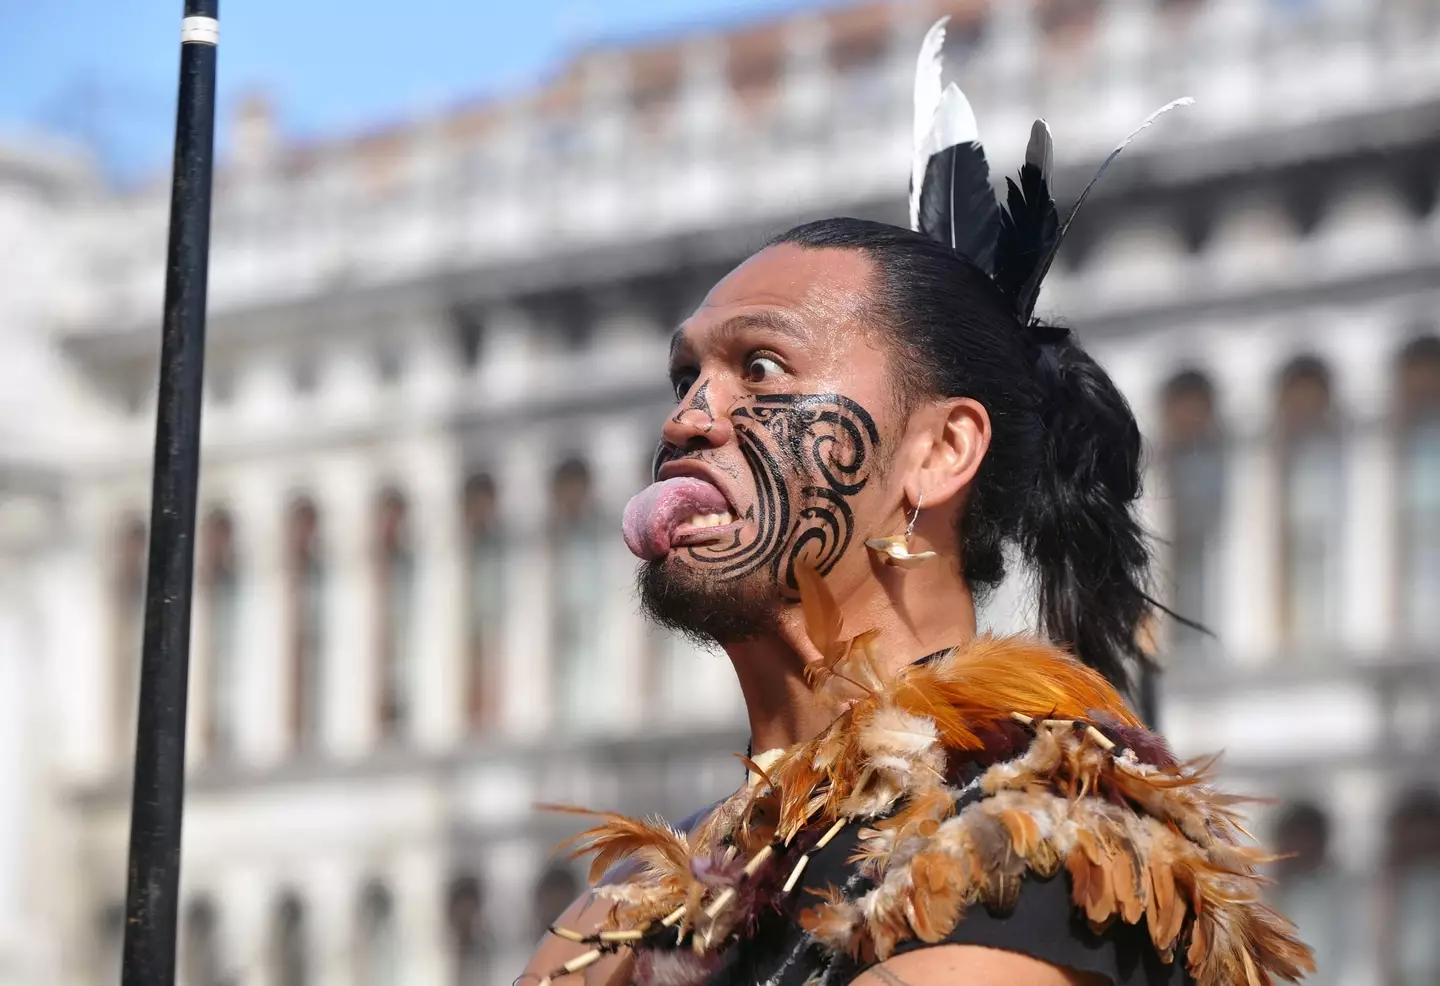 High-ranking Māori members would wear the feathers in headpieces. (ANDREA PATTARO/AFP via Getty Images)